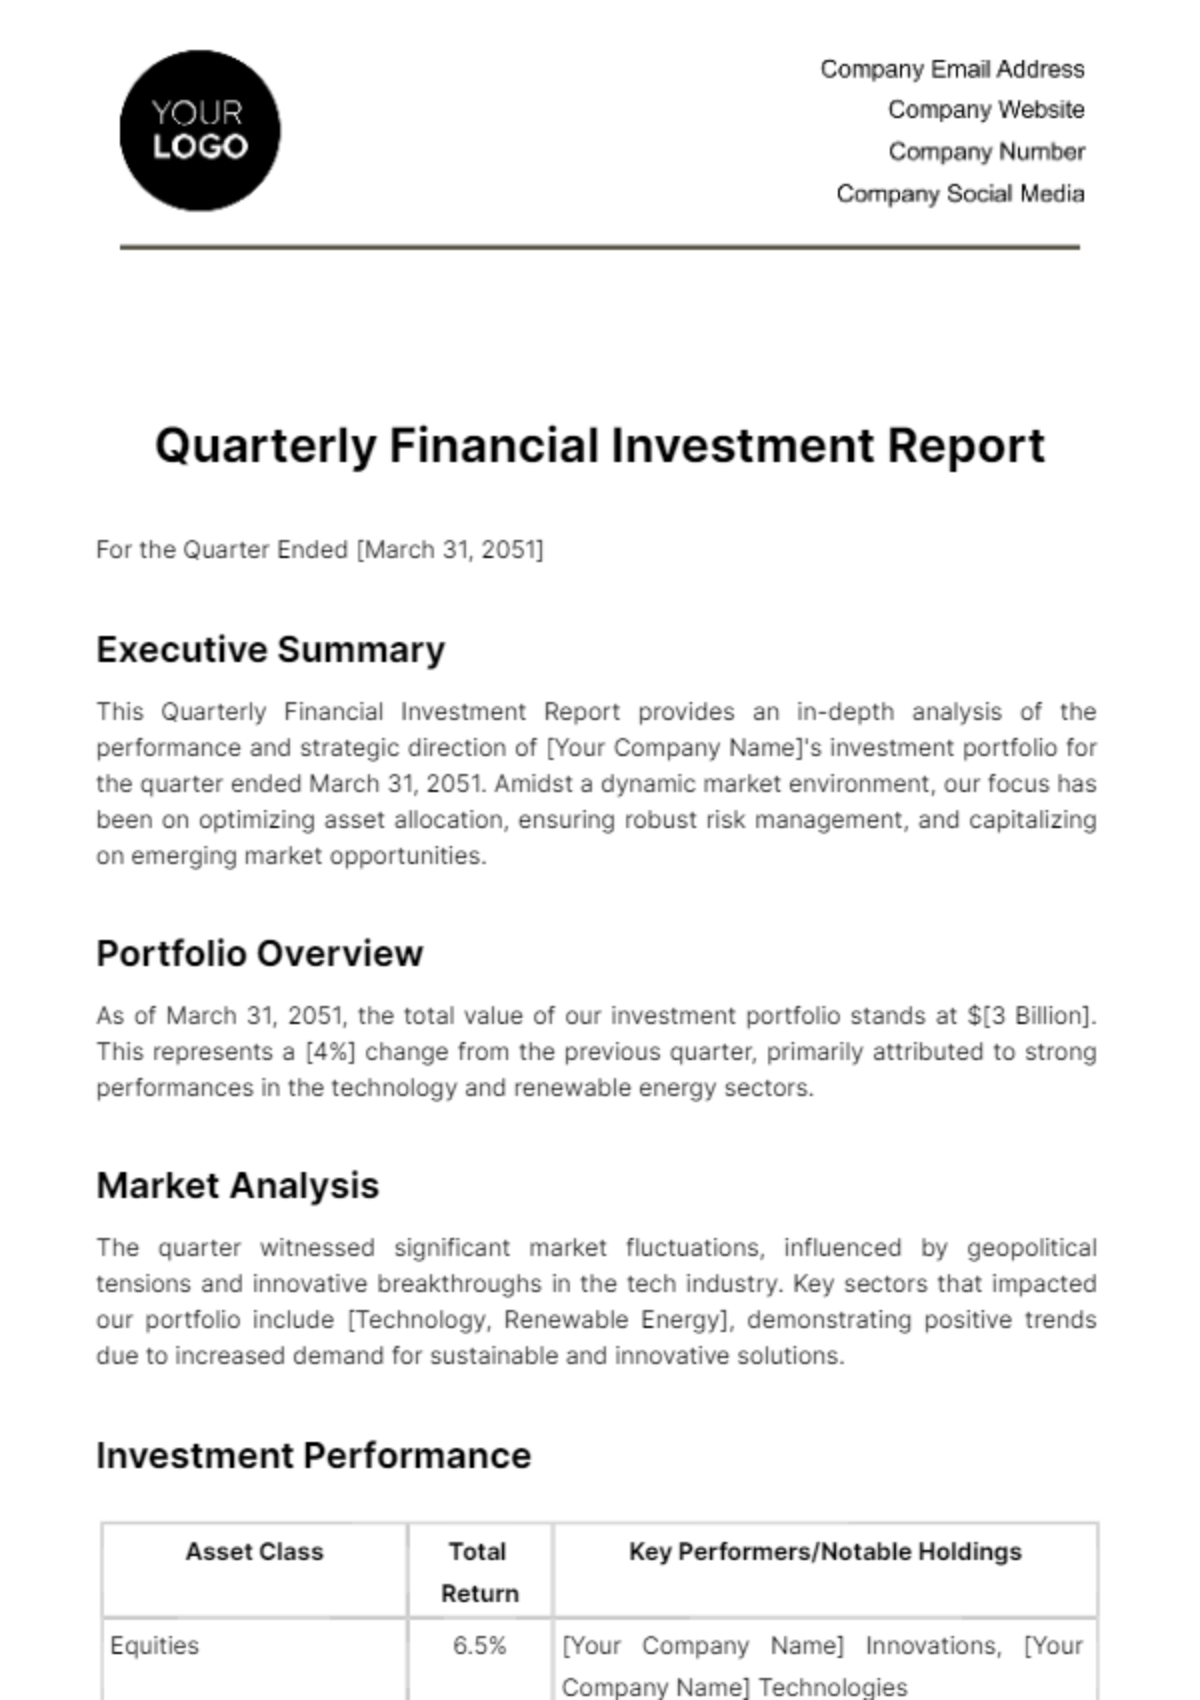 Quarterly Financial Investment Report Template